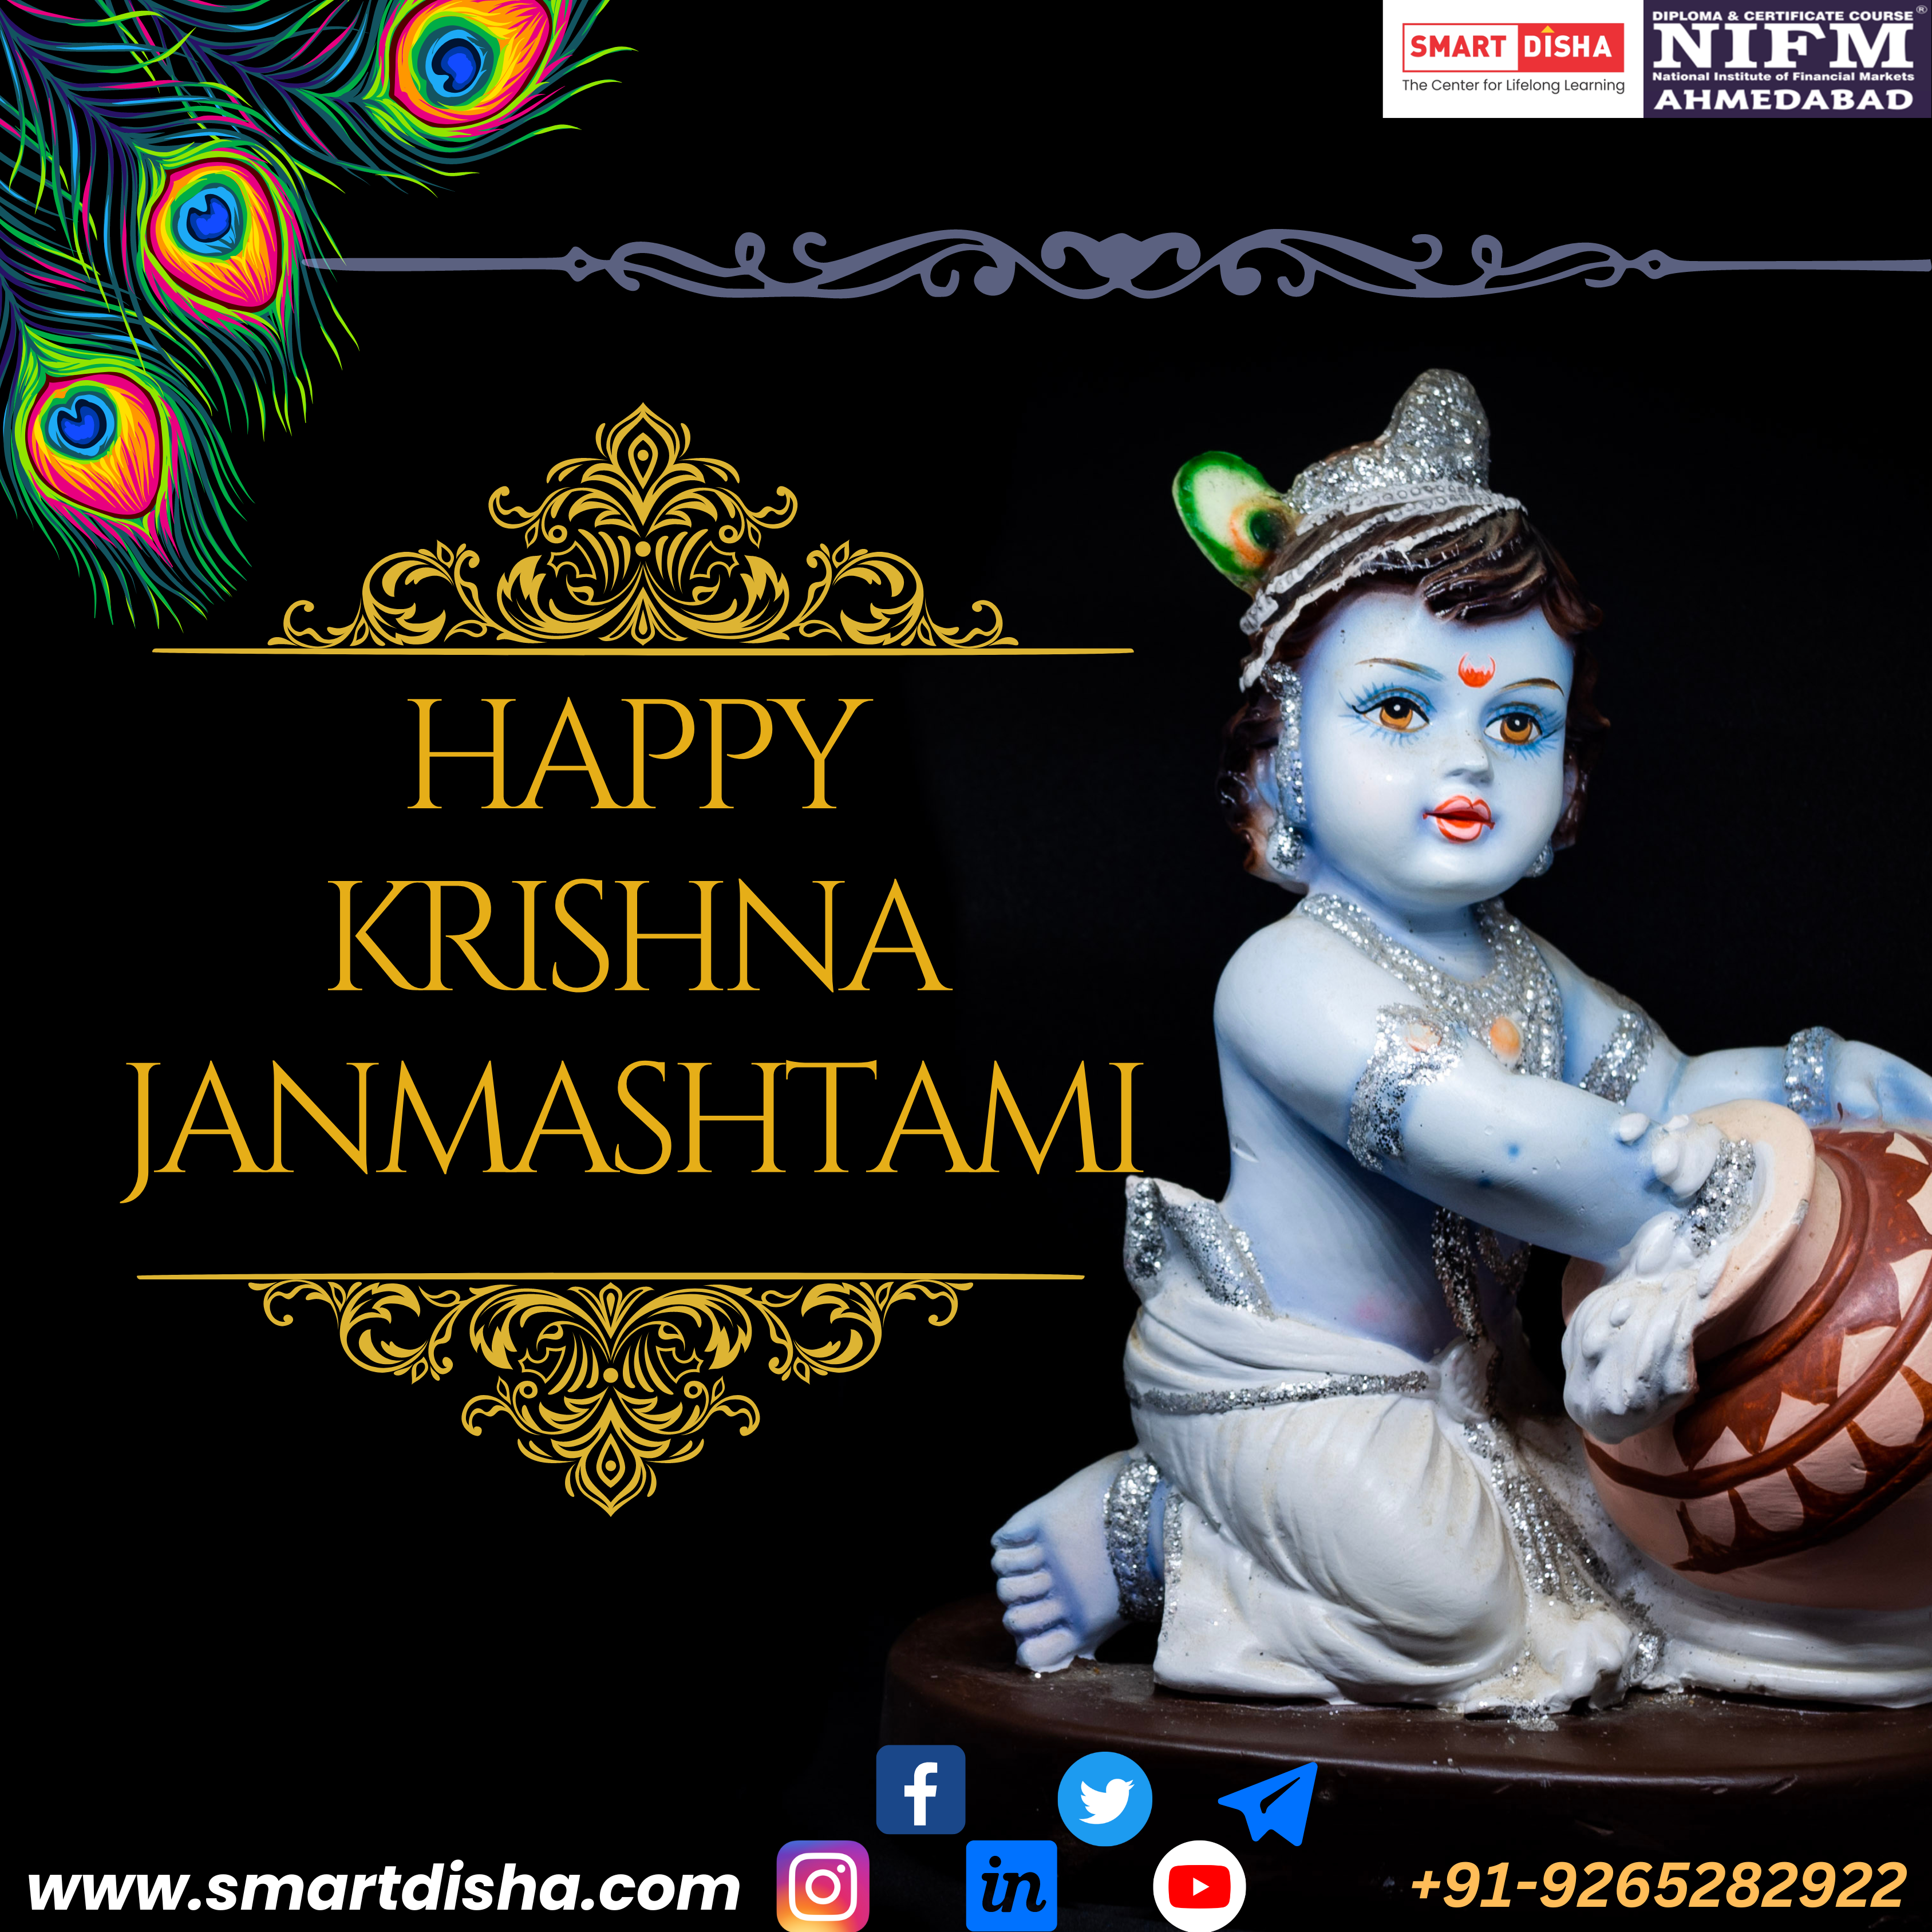 Read more about the article The Significance of Krishna Janmashtami: Learning from Our Rich Heritage for a Happy and Peaceful Life